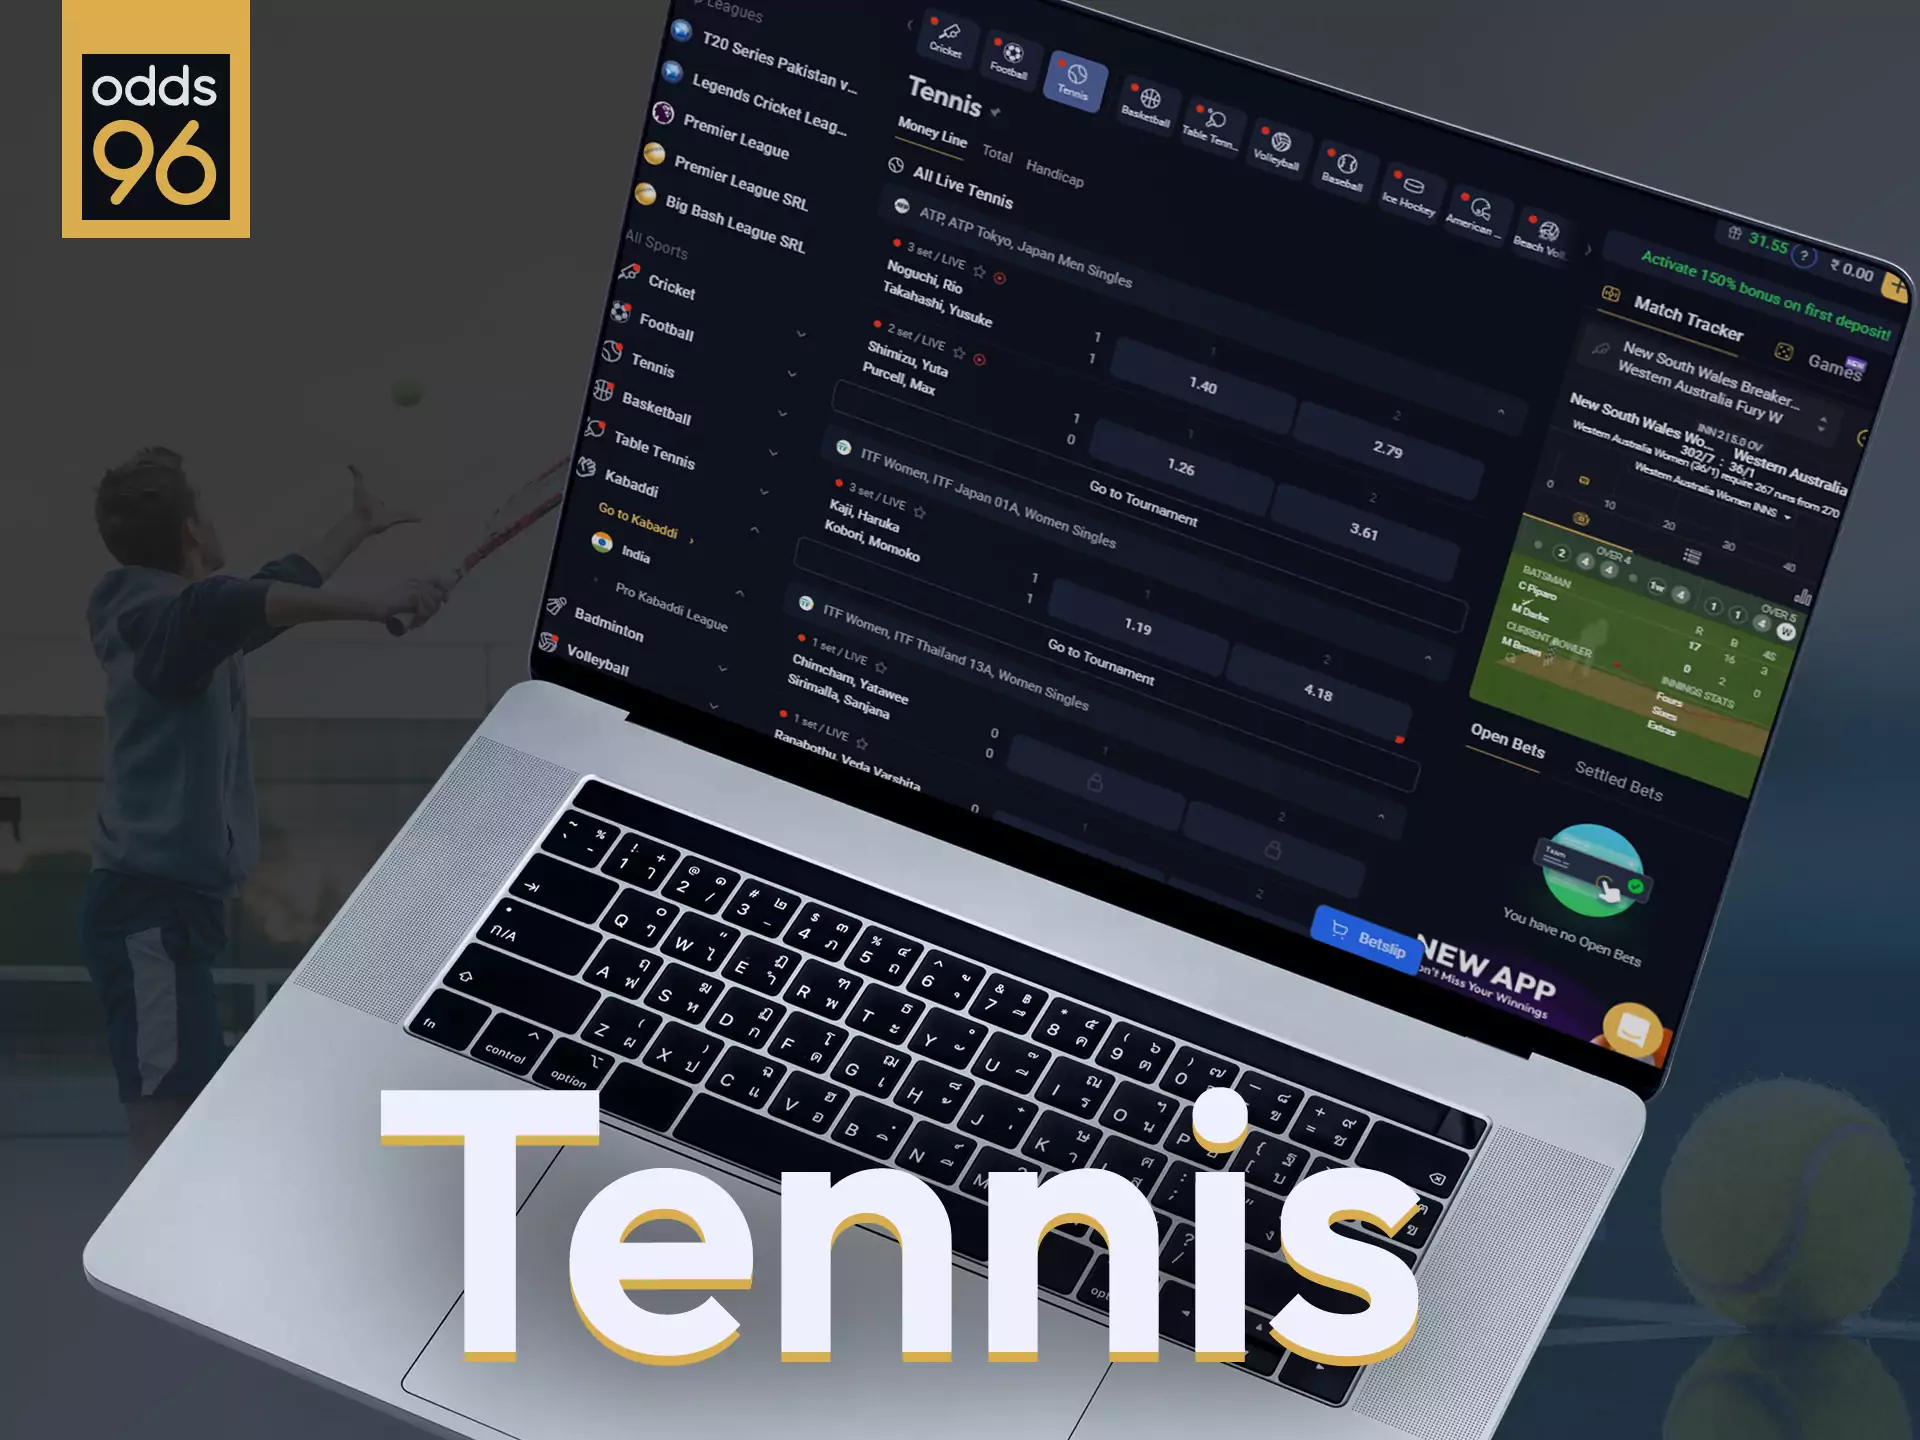 Place bets in Odds96 on tennis.